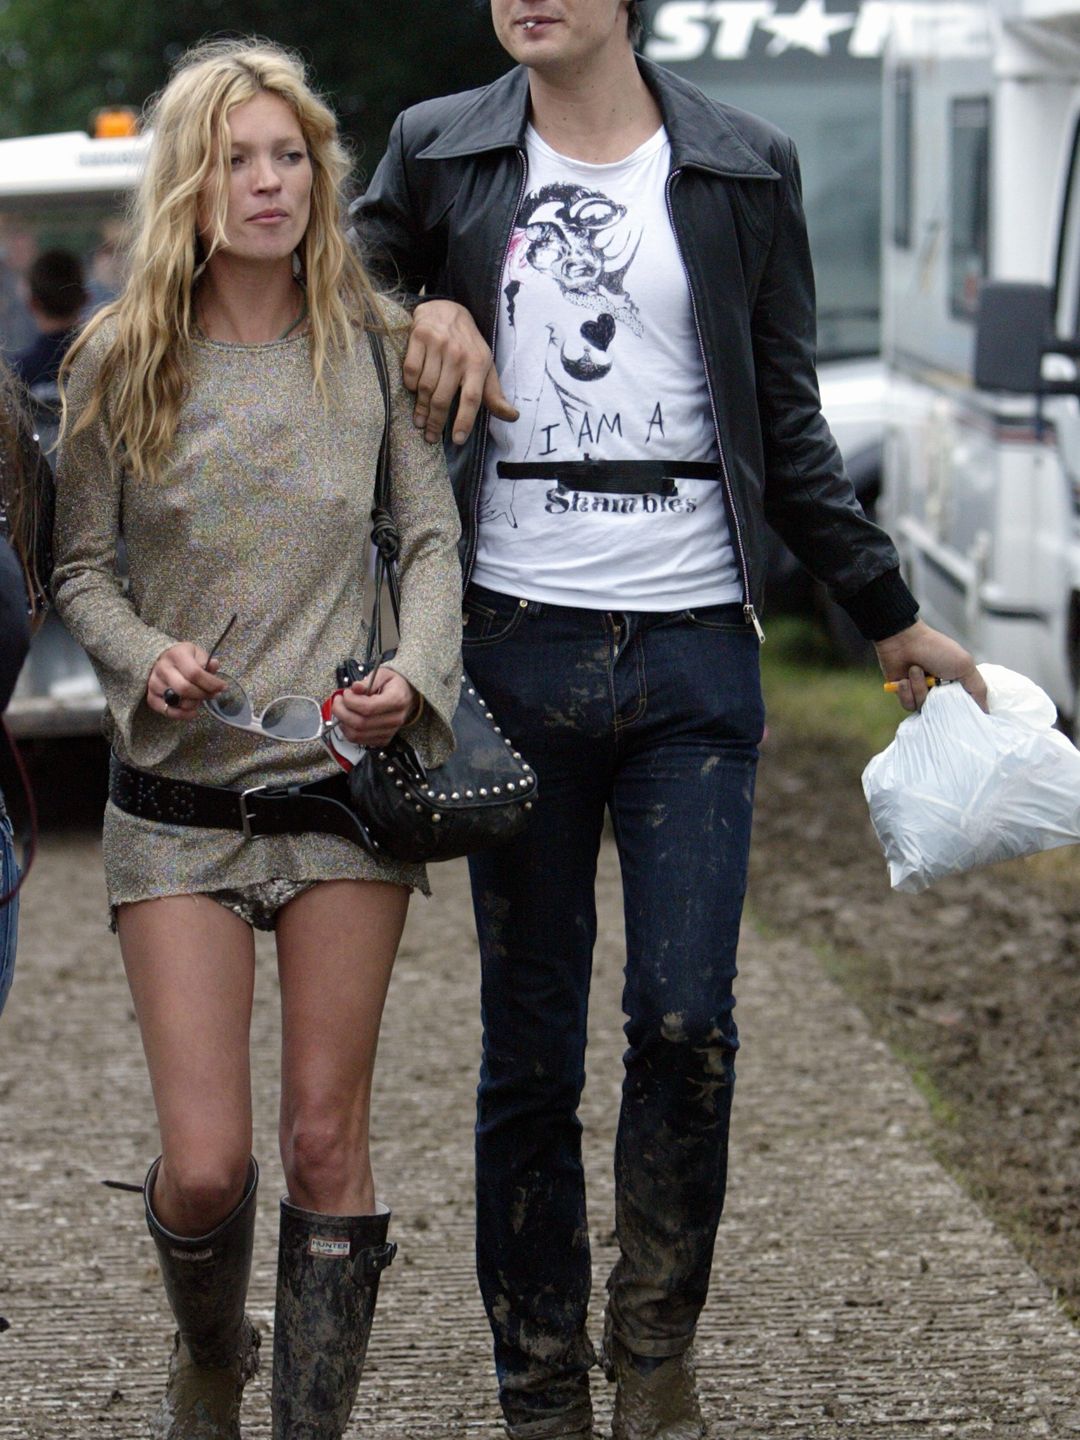 Kate Moss wears wellington boots and a sparkly top to Glastonbury in 2005